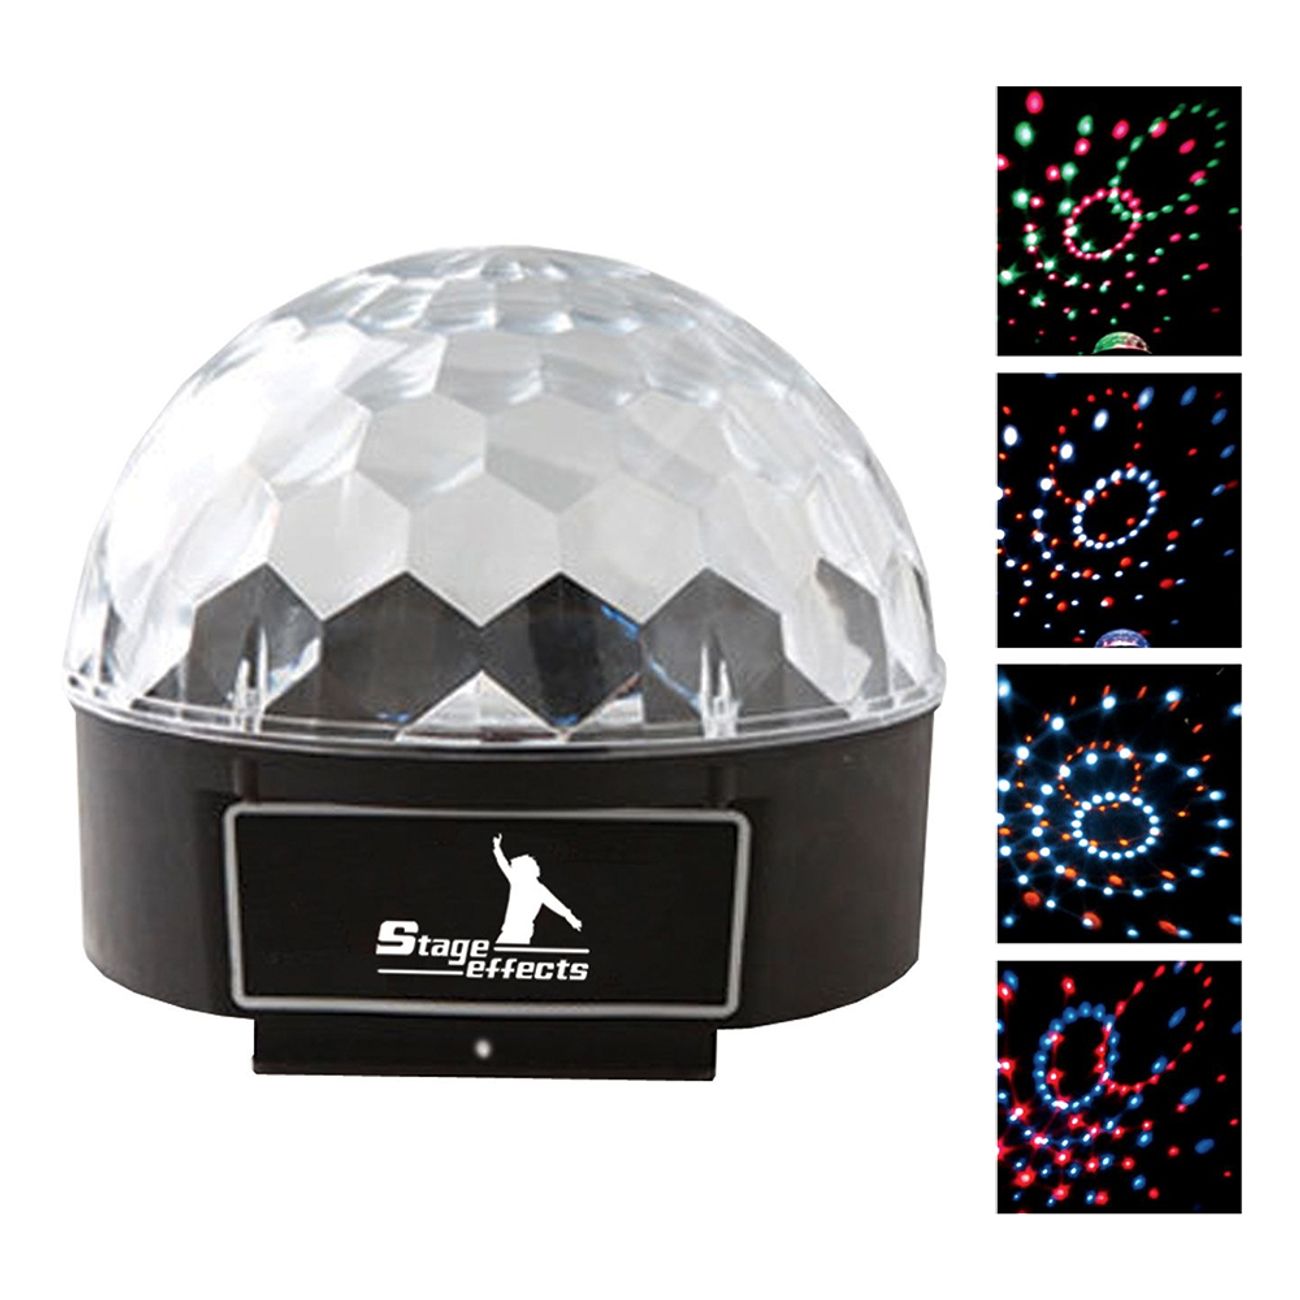 stage-effects-led-magic-ball-1